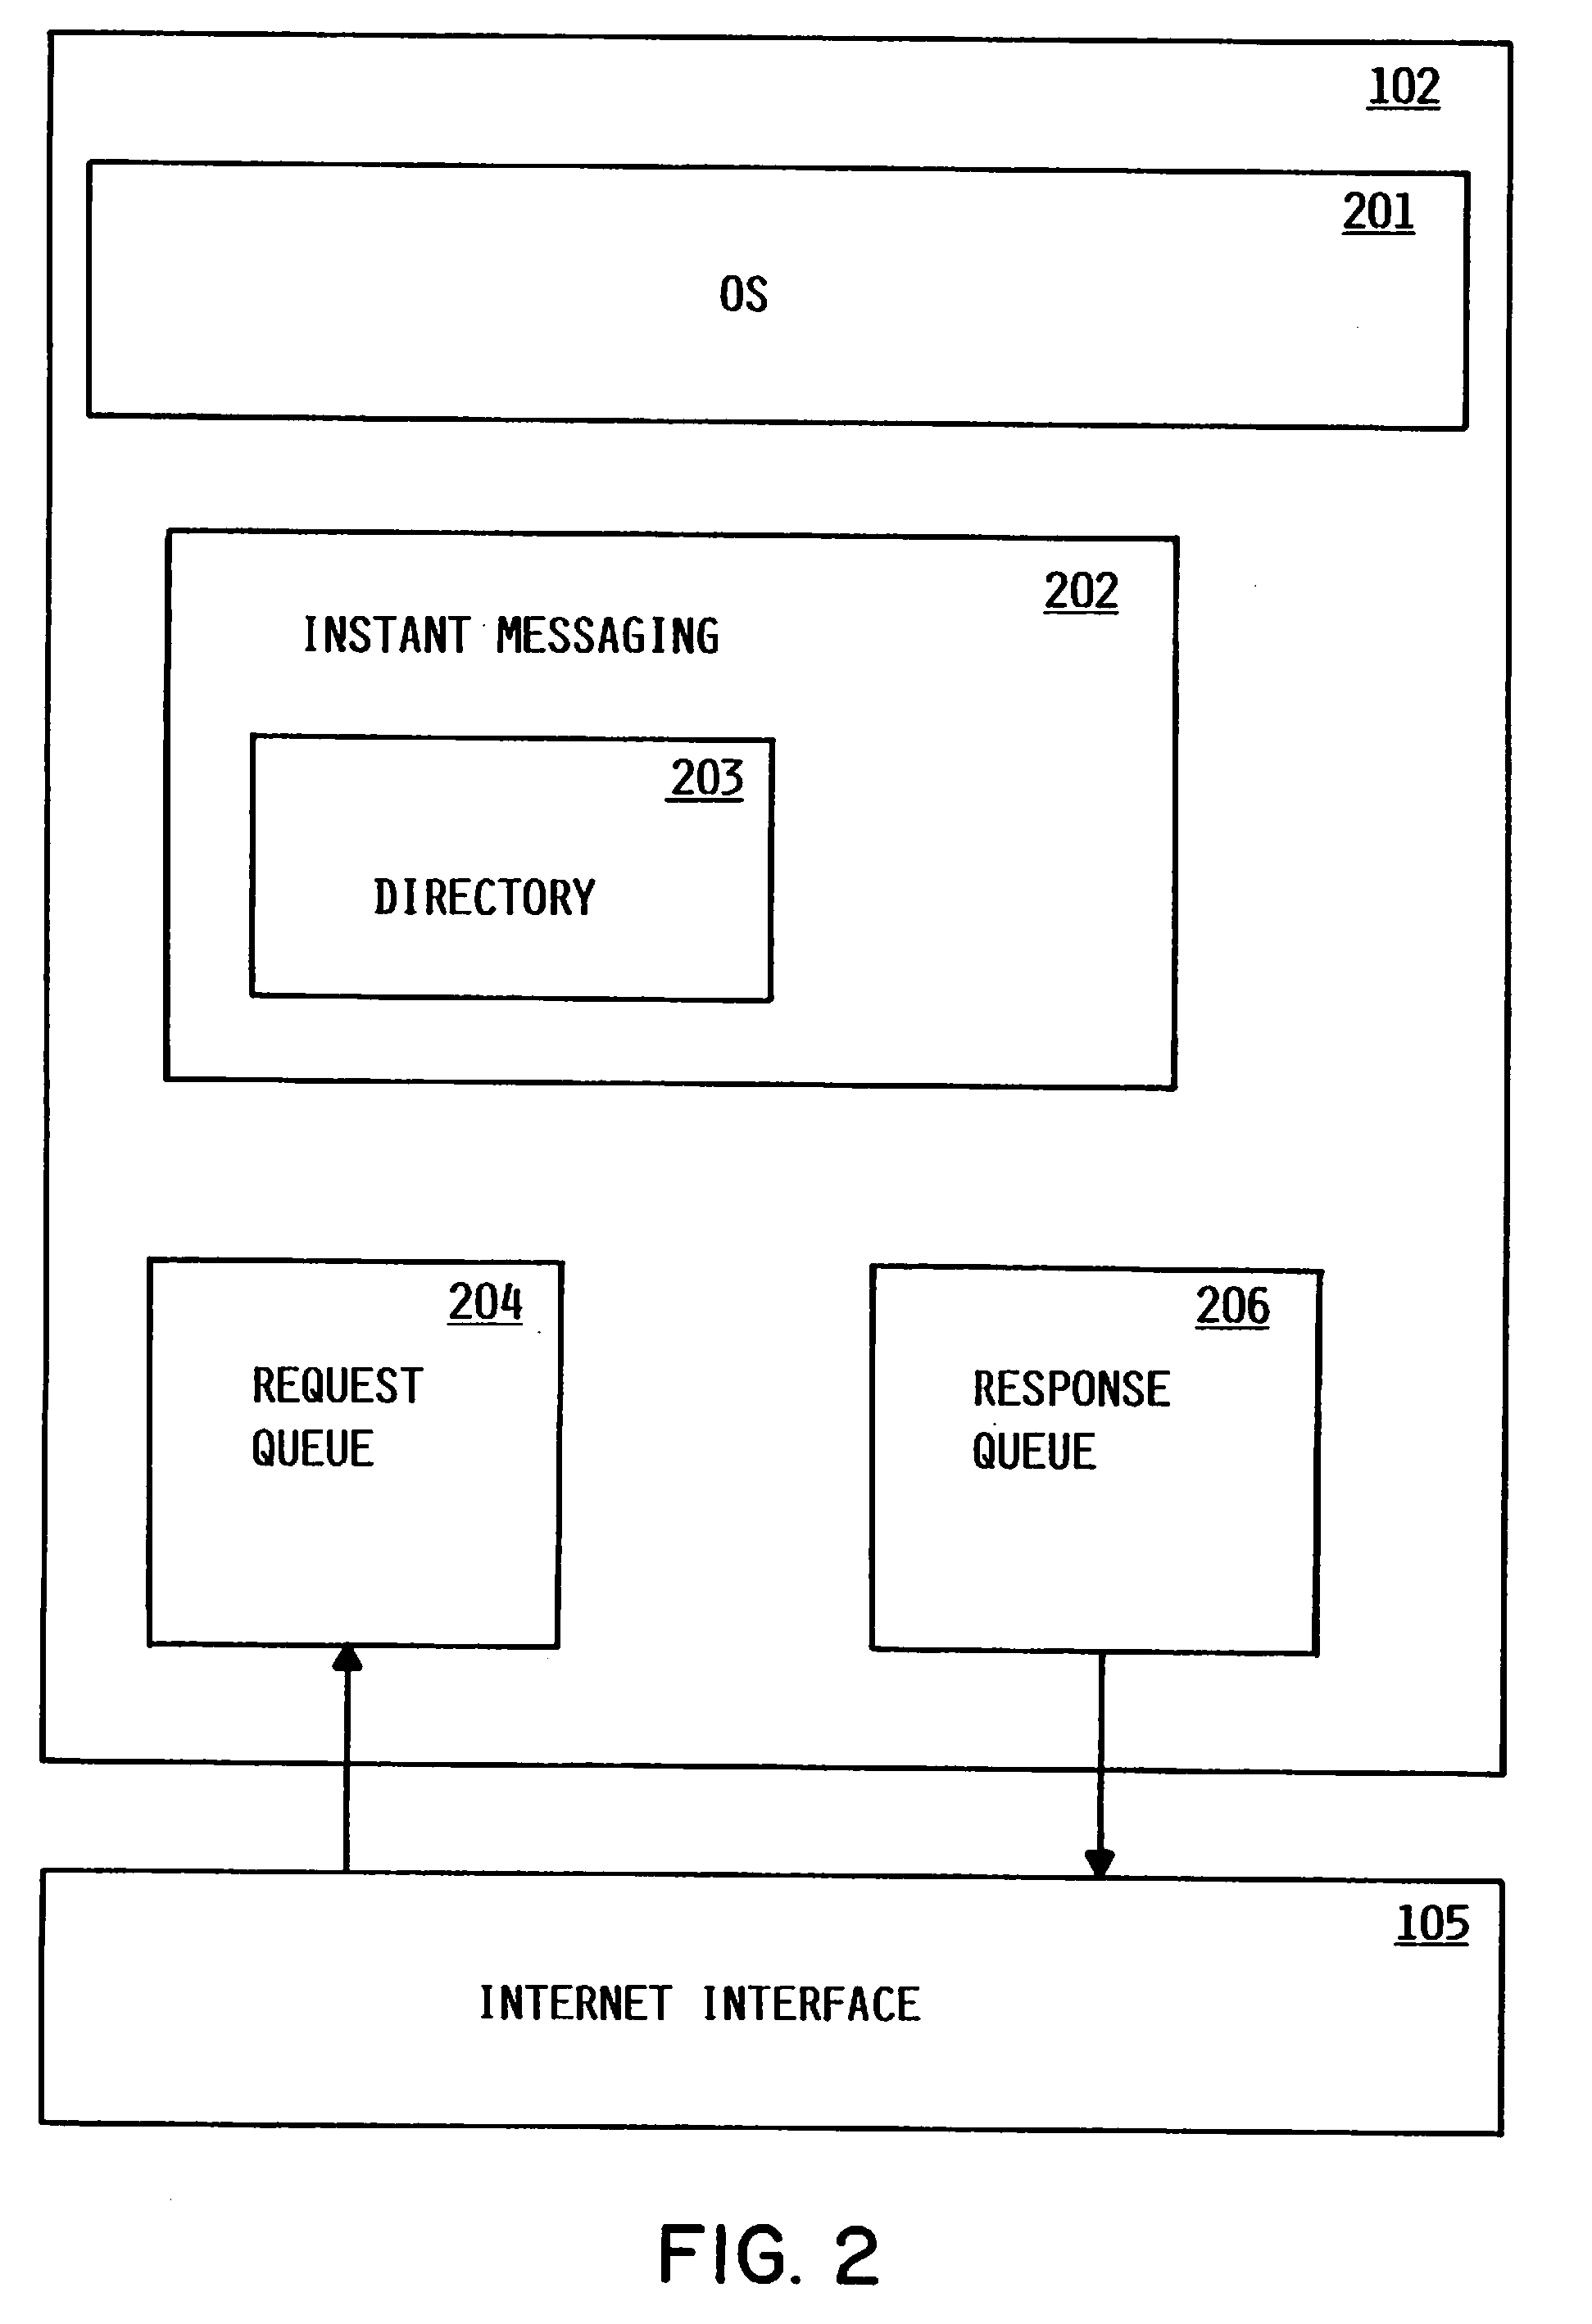 Method and Apparatus for Determining Availability of a User of an Instant Messaging Application